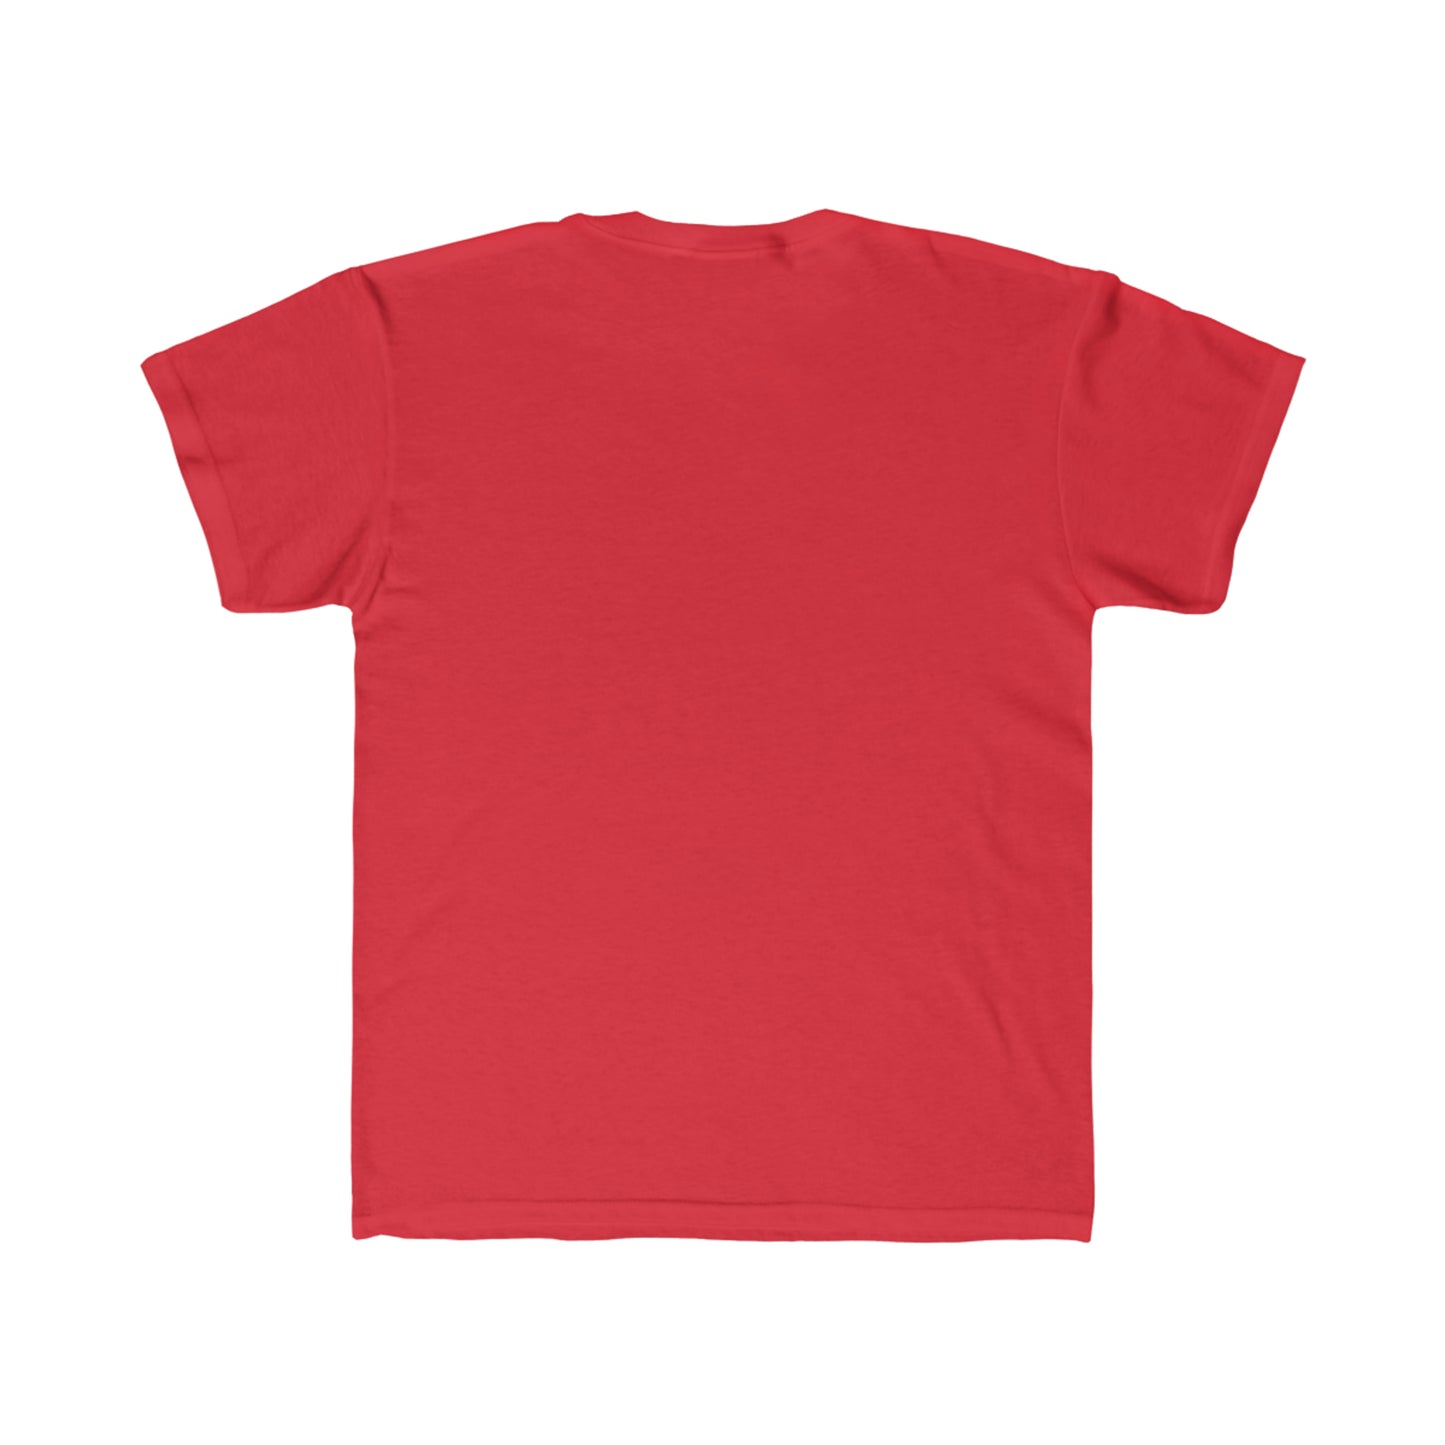 Cycle Ranch Classic - Kids Regular Fit Tee